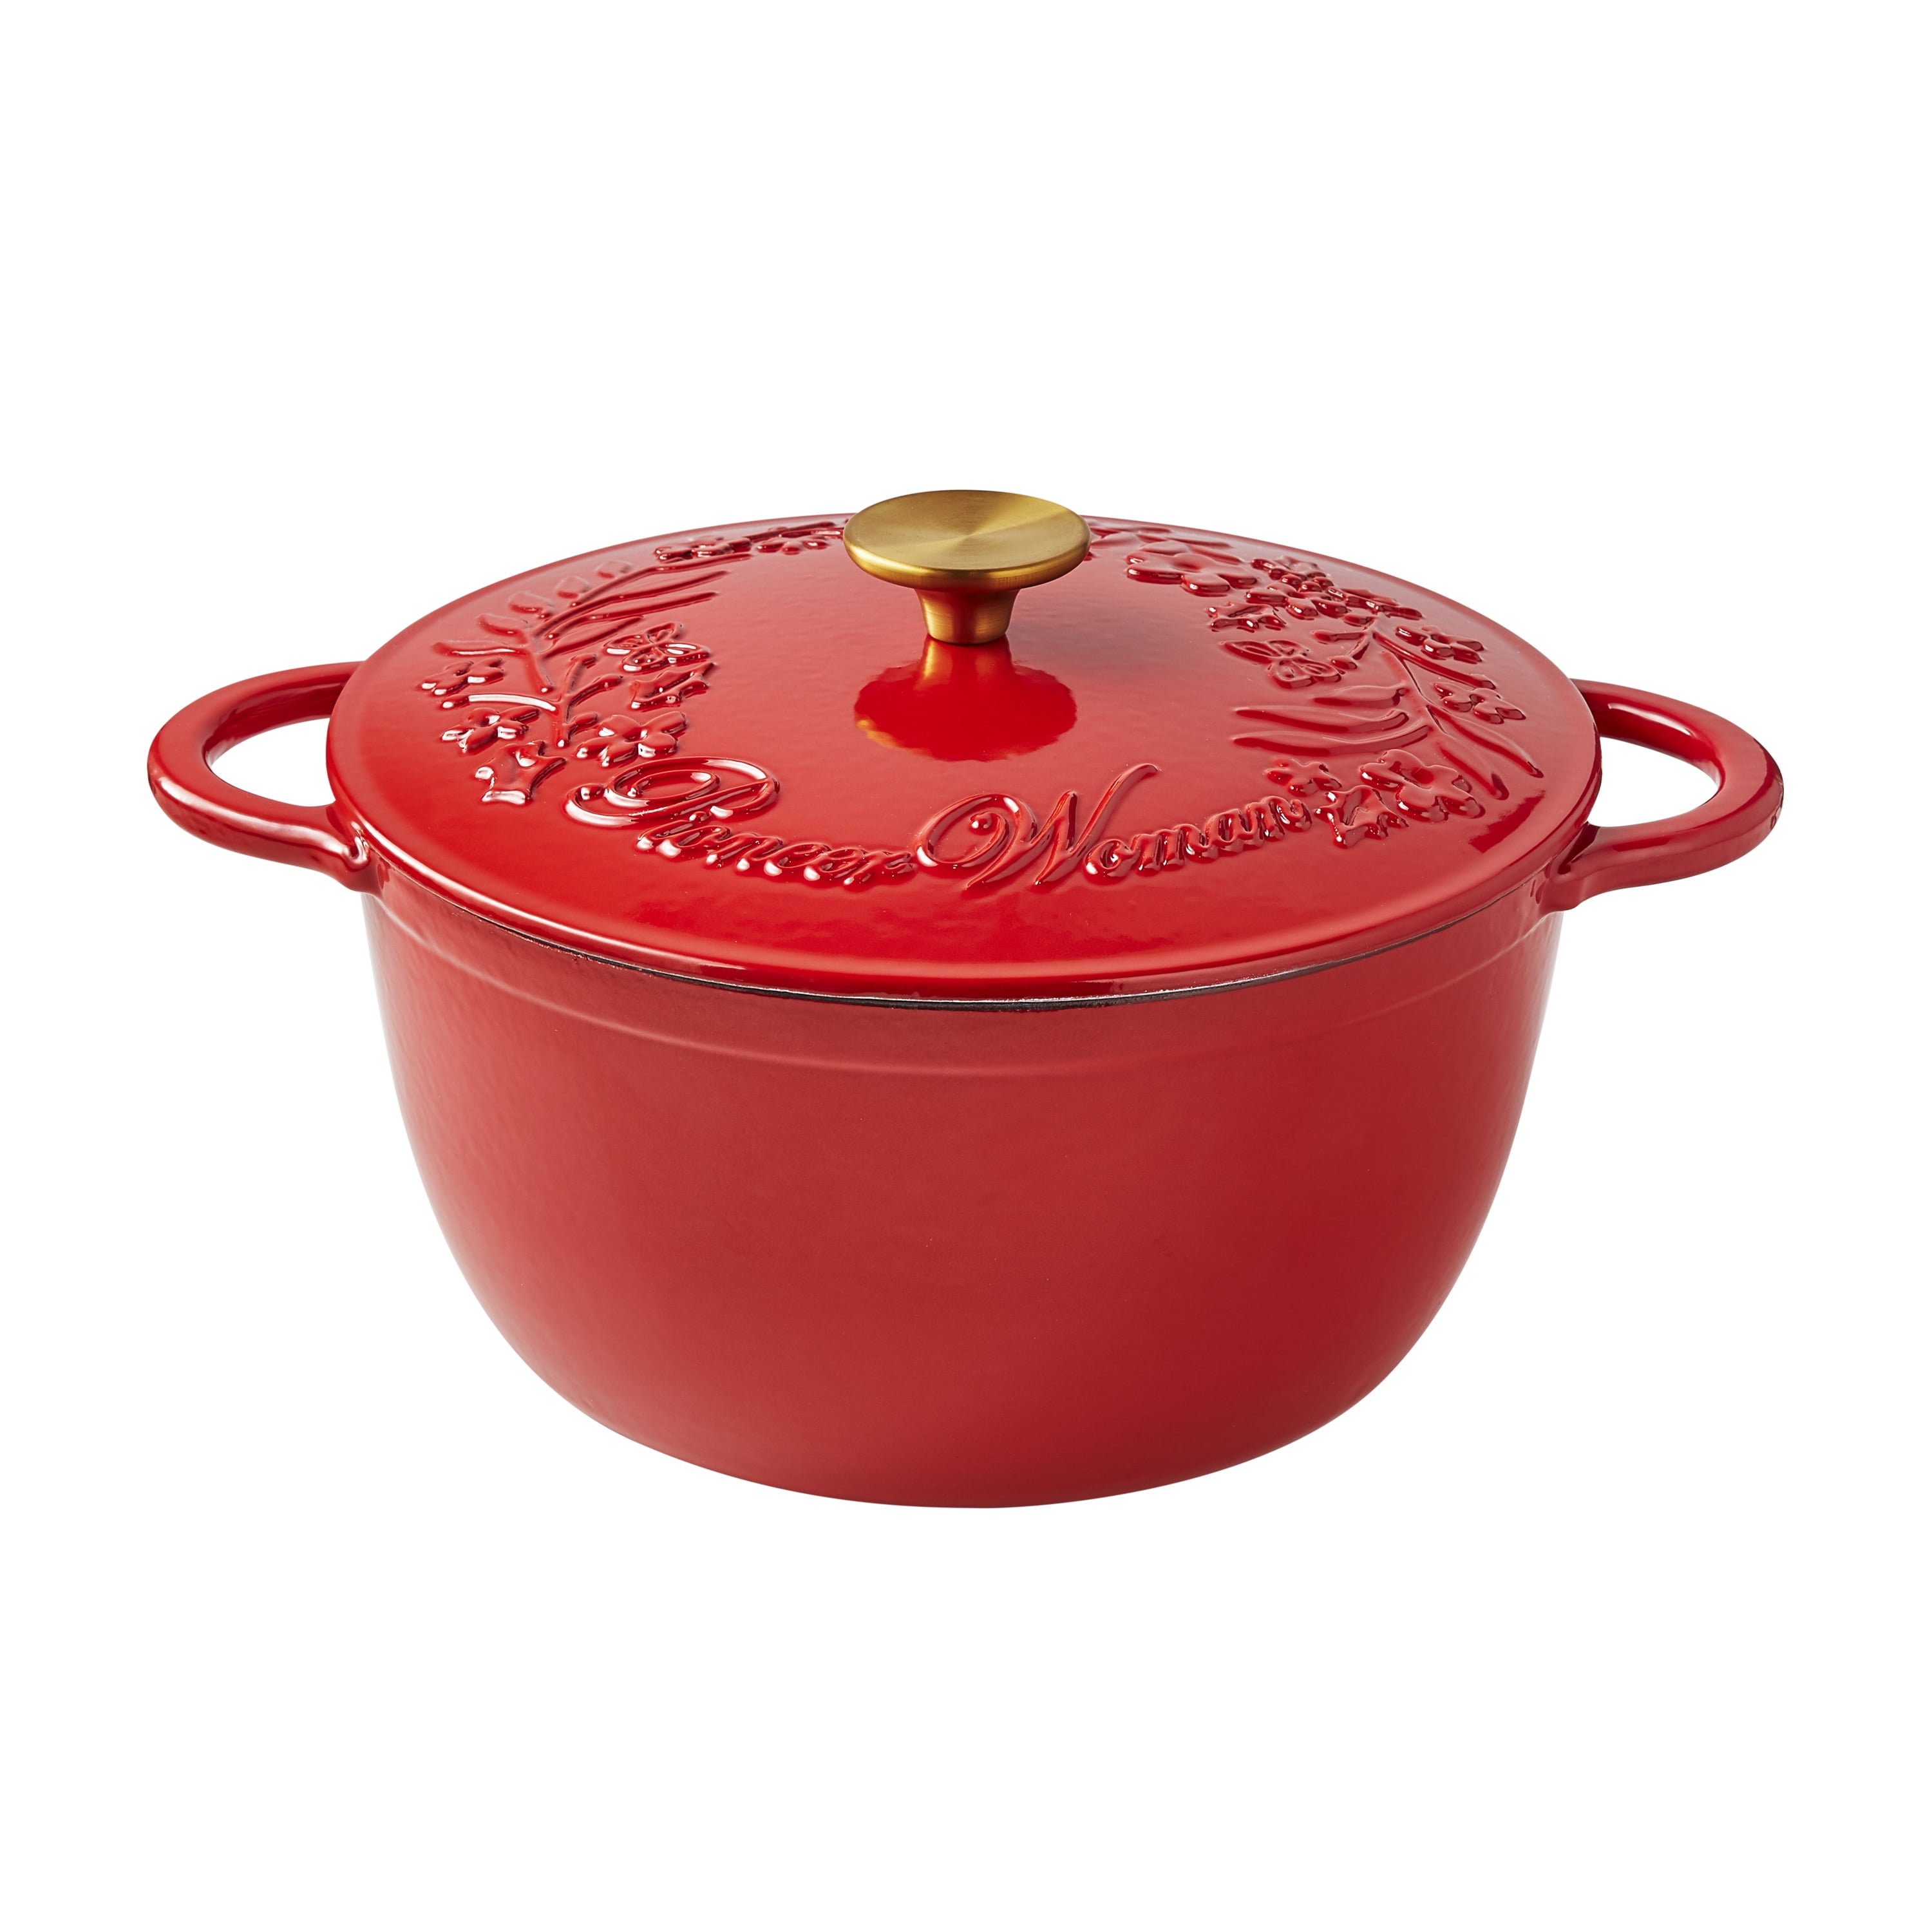 Holiday Meals Made Easy with Food Network Dutch Oven #MegaChristmas21 -  It's Free At Last